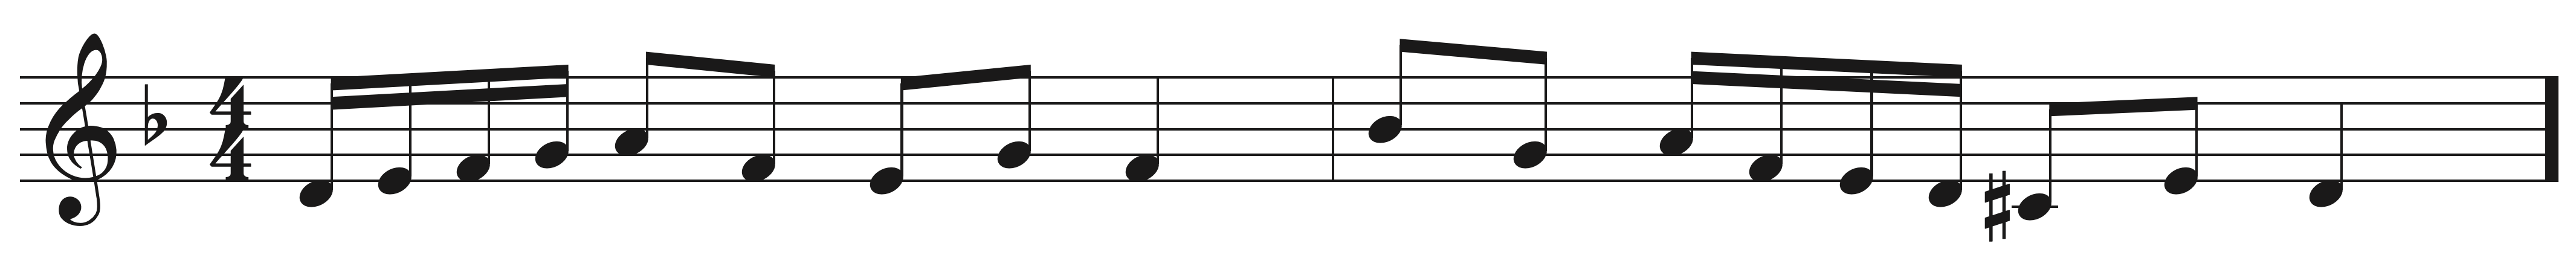 Intro to Harmonizing a Melody Aural Training exercise example